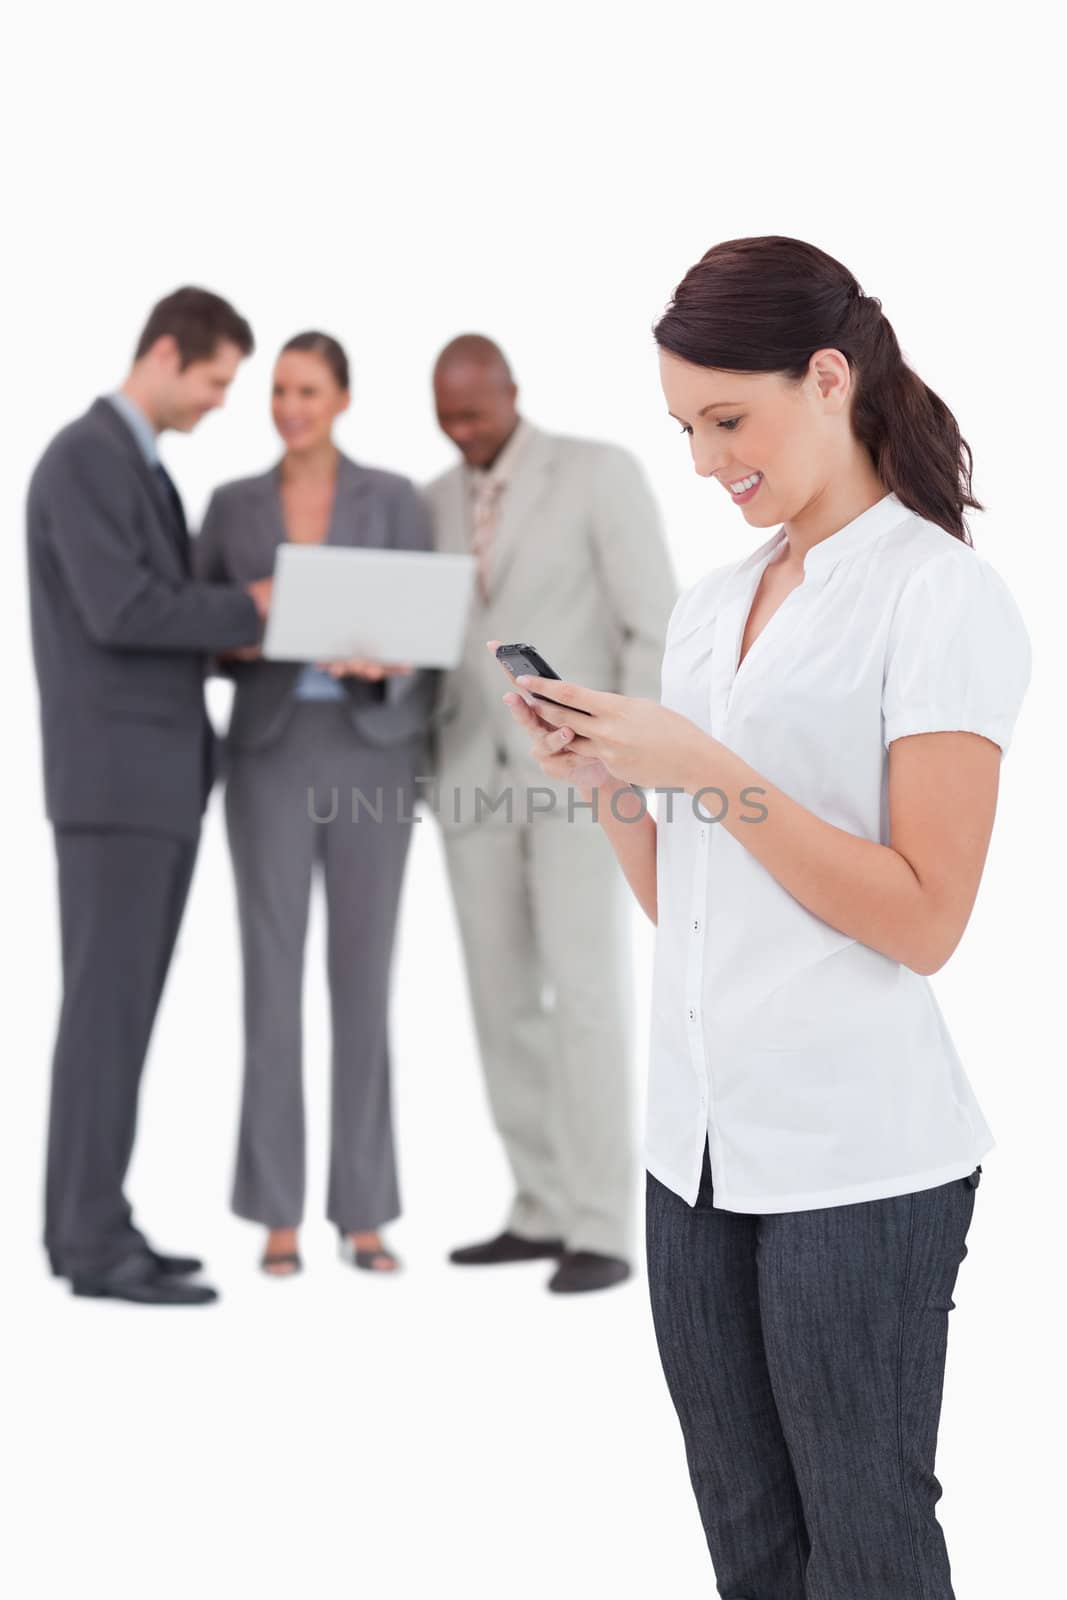 Saleswoman with mobile phone and colleagues behind her against a white background